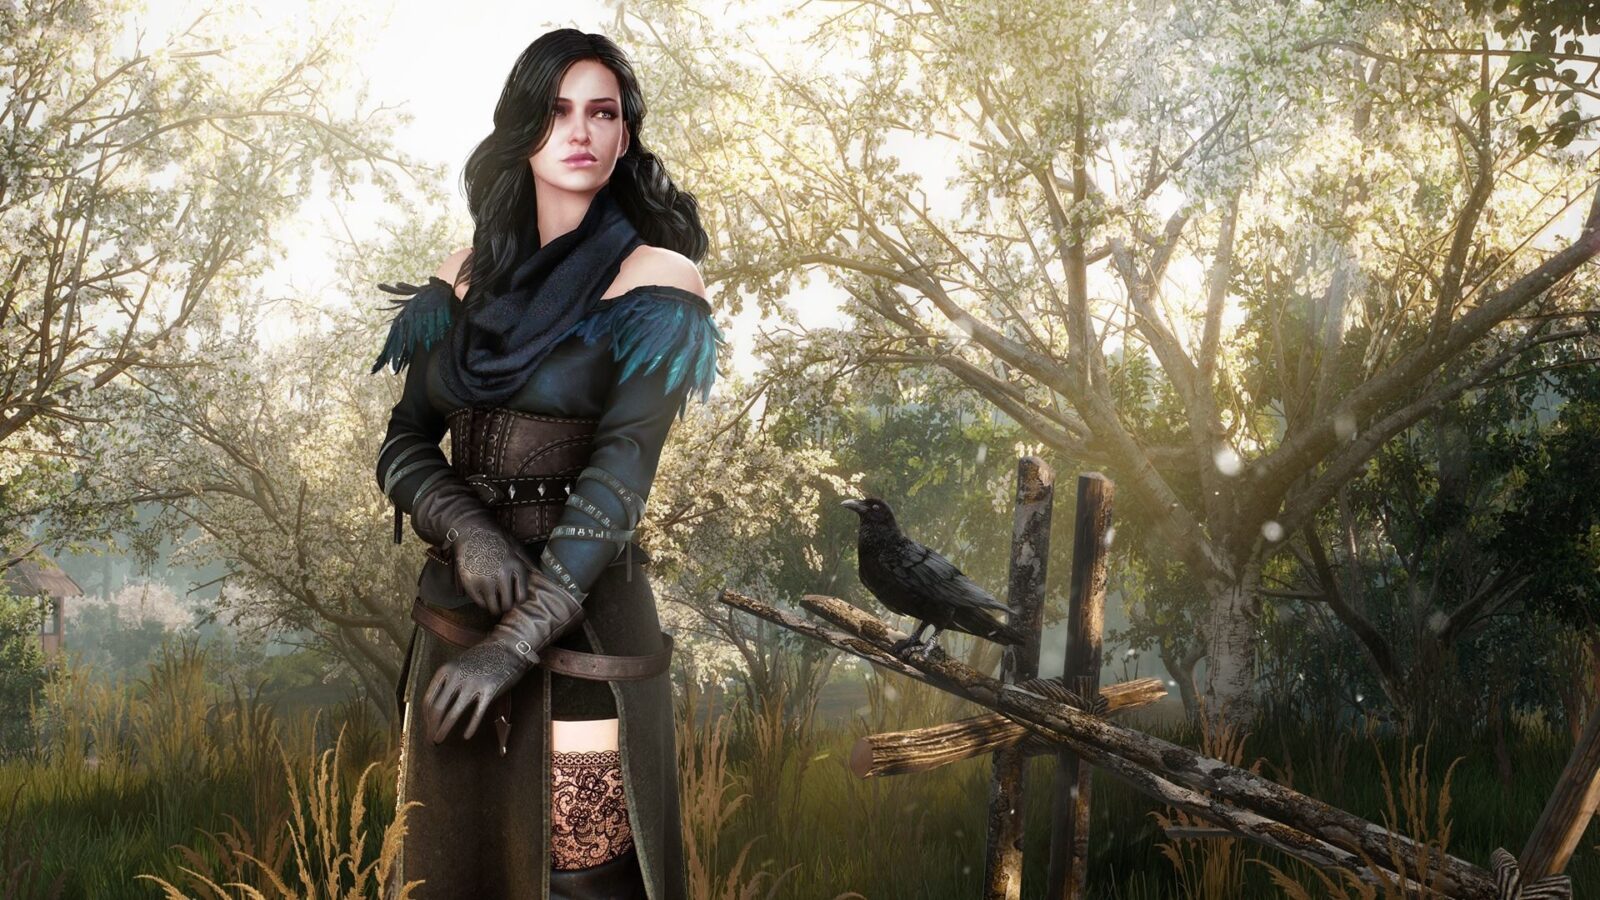 Is Yennefer in the DLC Witcher 3?